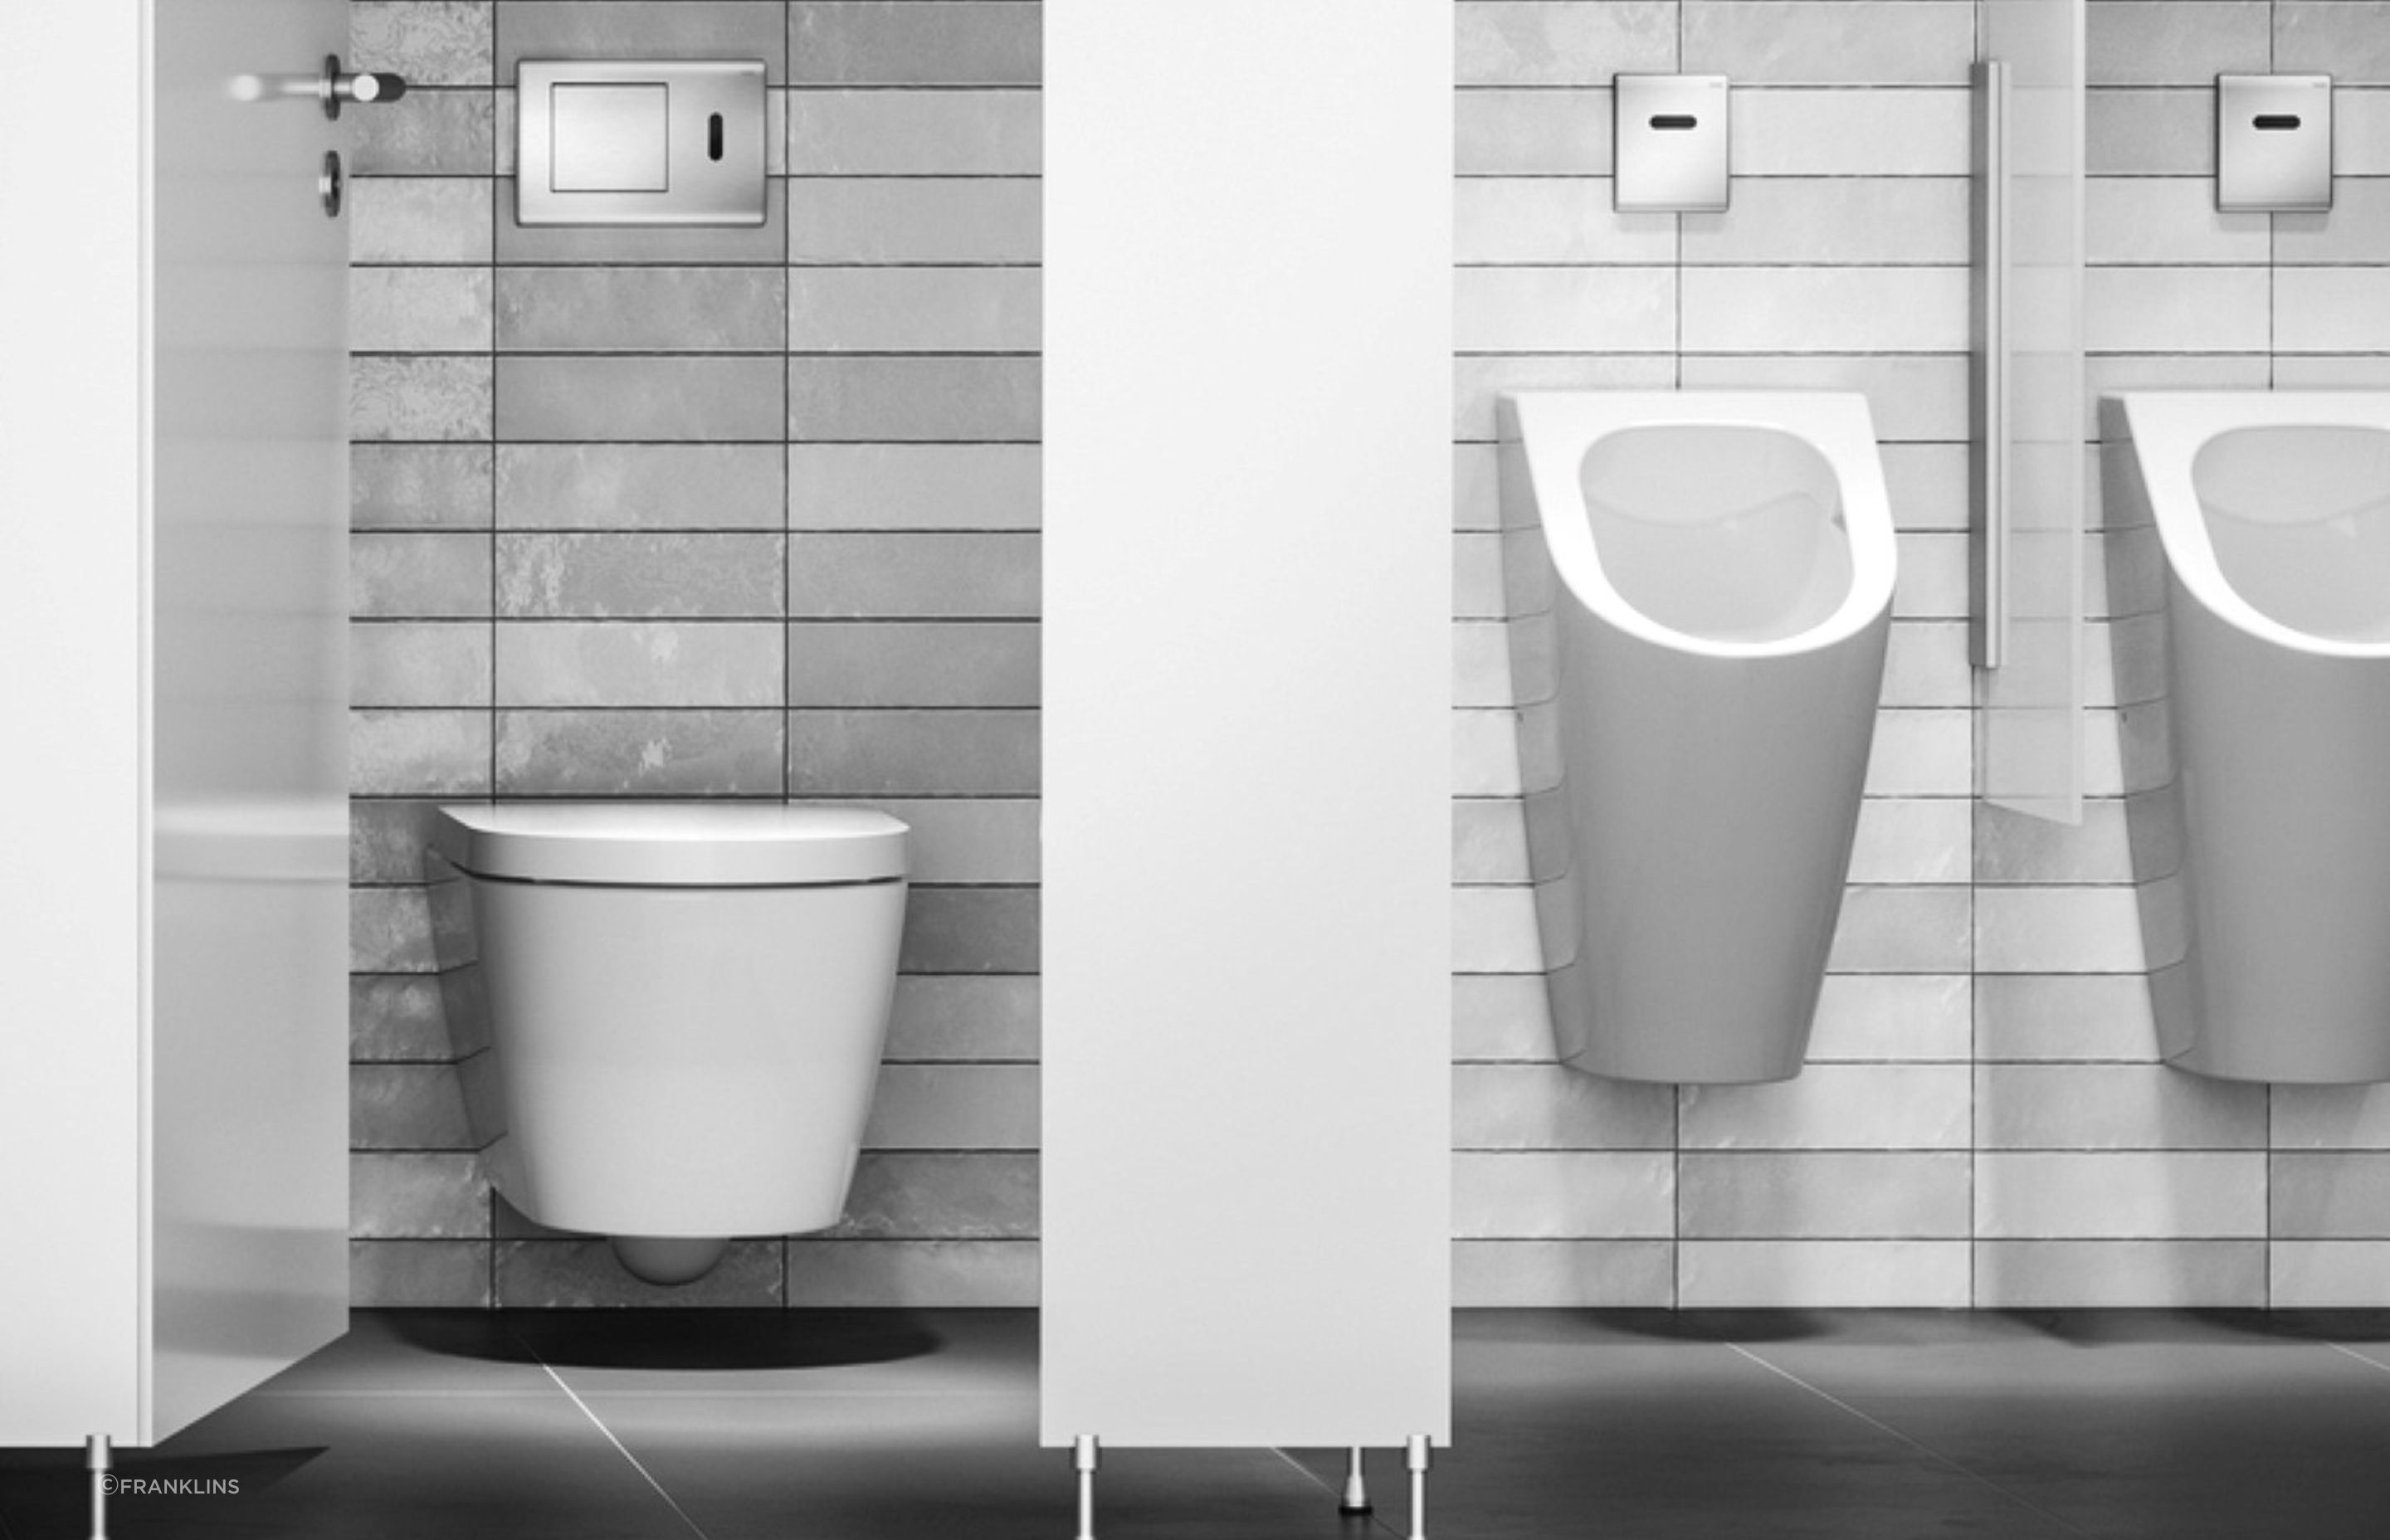 The Tece Planus Urinal Infrared Operating Panel is a great feature for a urinal that allows contactless flushing.